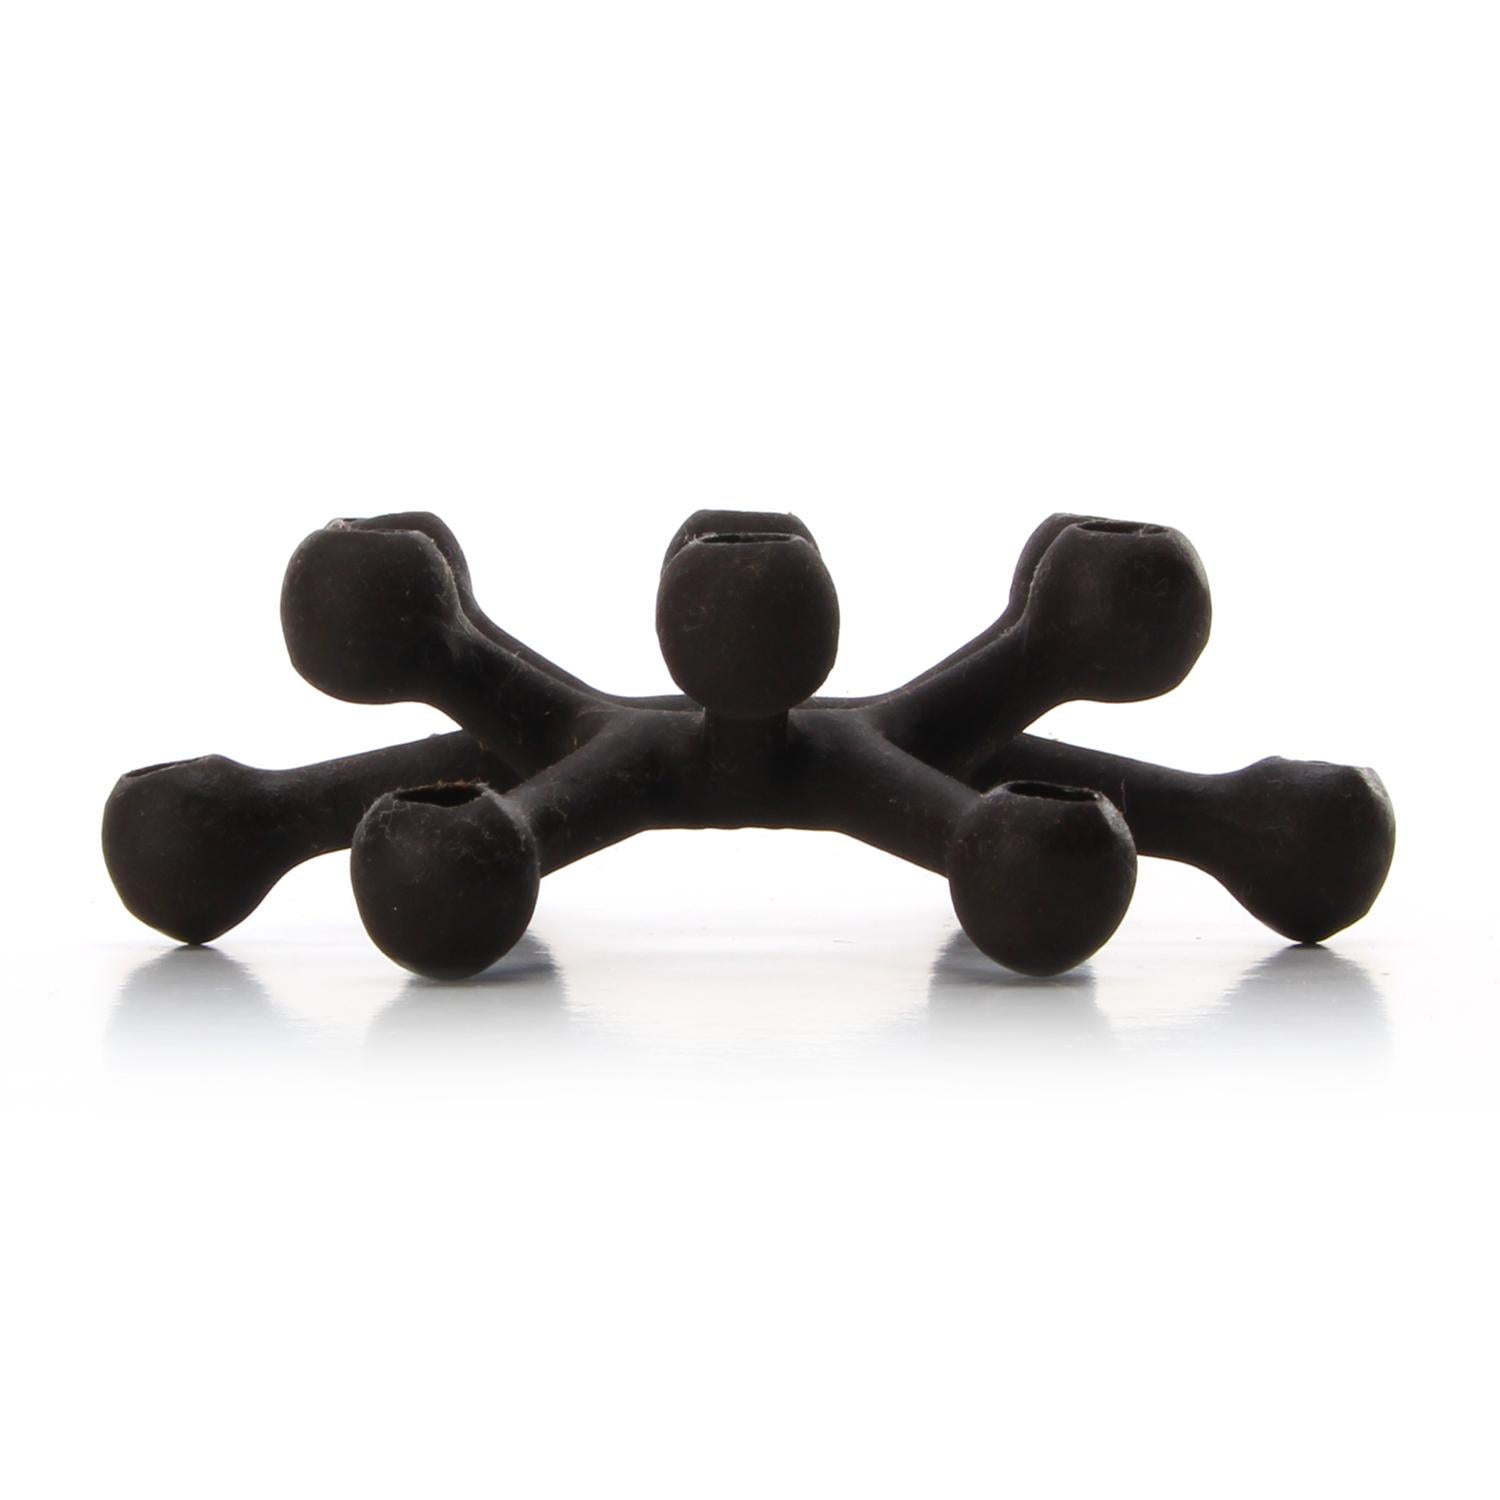 Mid-Century Modern Spider by Jens Quistgaard for Dansk Designs in 1963, Including 3PK New Candles